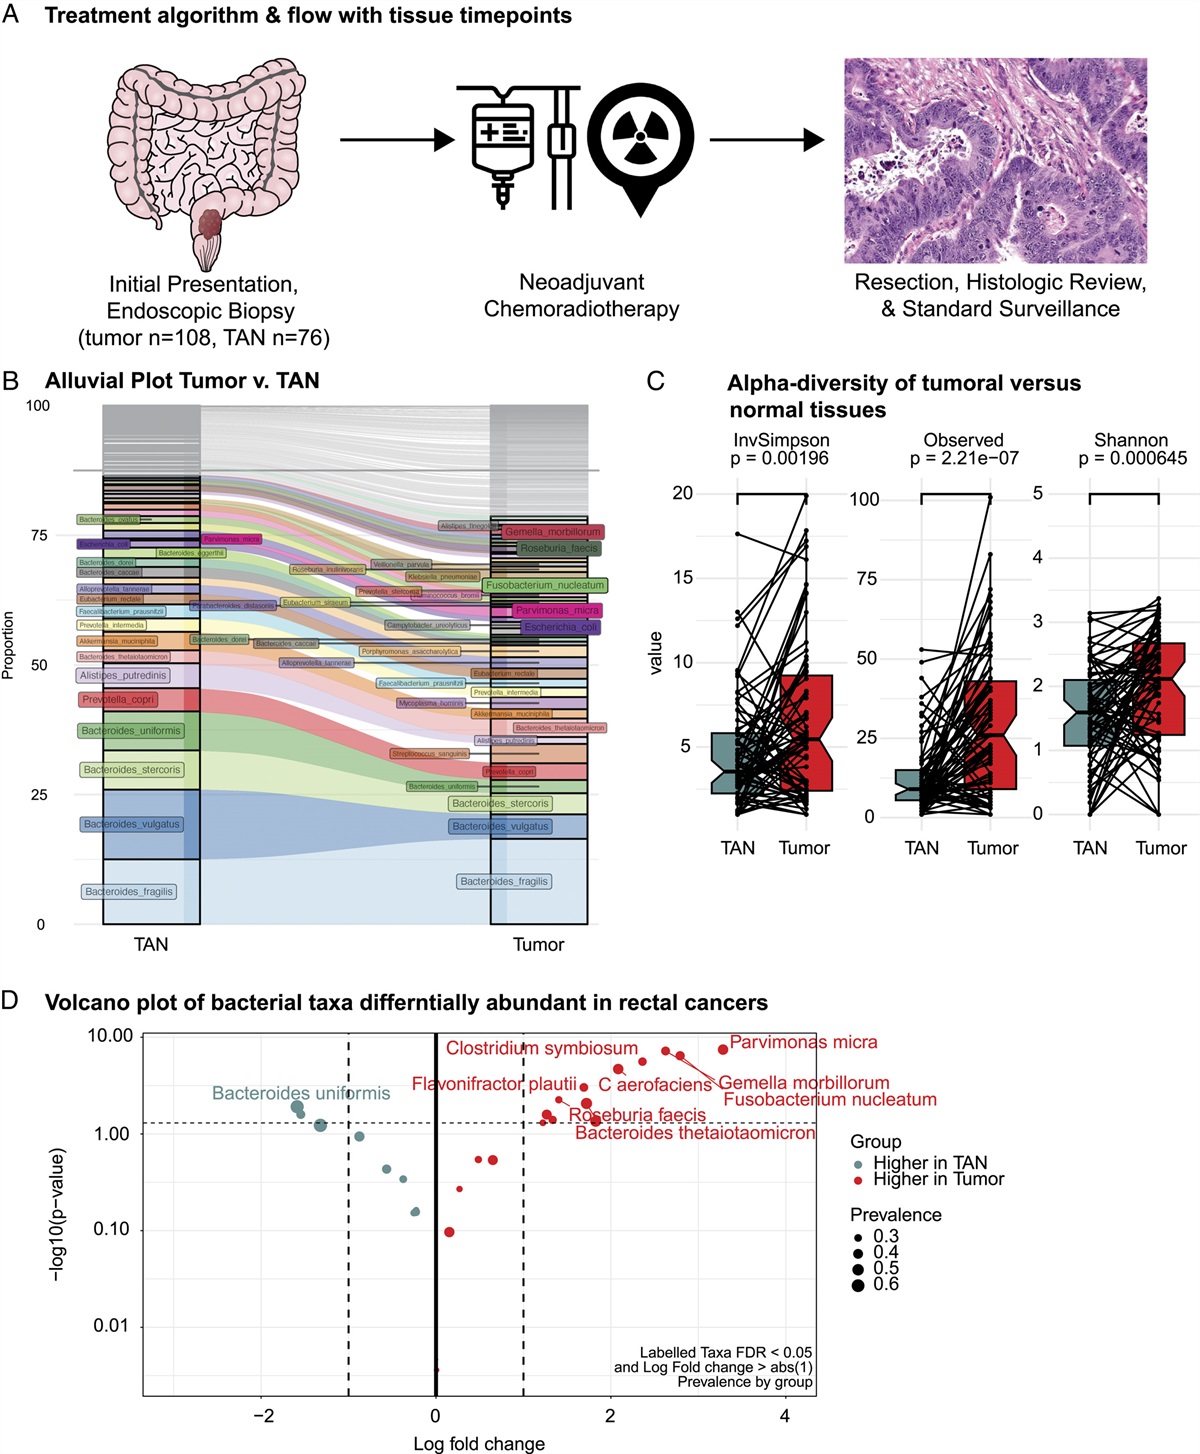 Young-onset Rectal Cancer: Unique Tumoral Microbiome and Correlation With Response to Neoadjuvant Therapy